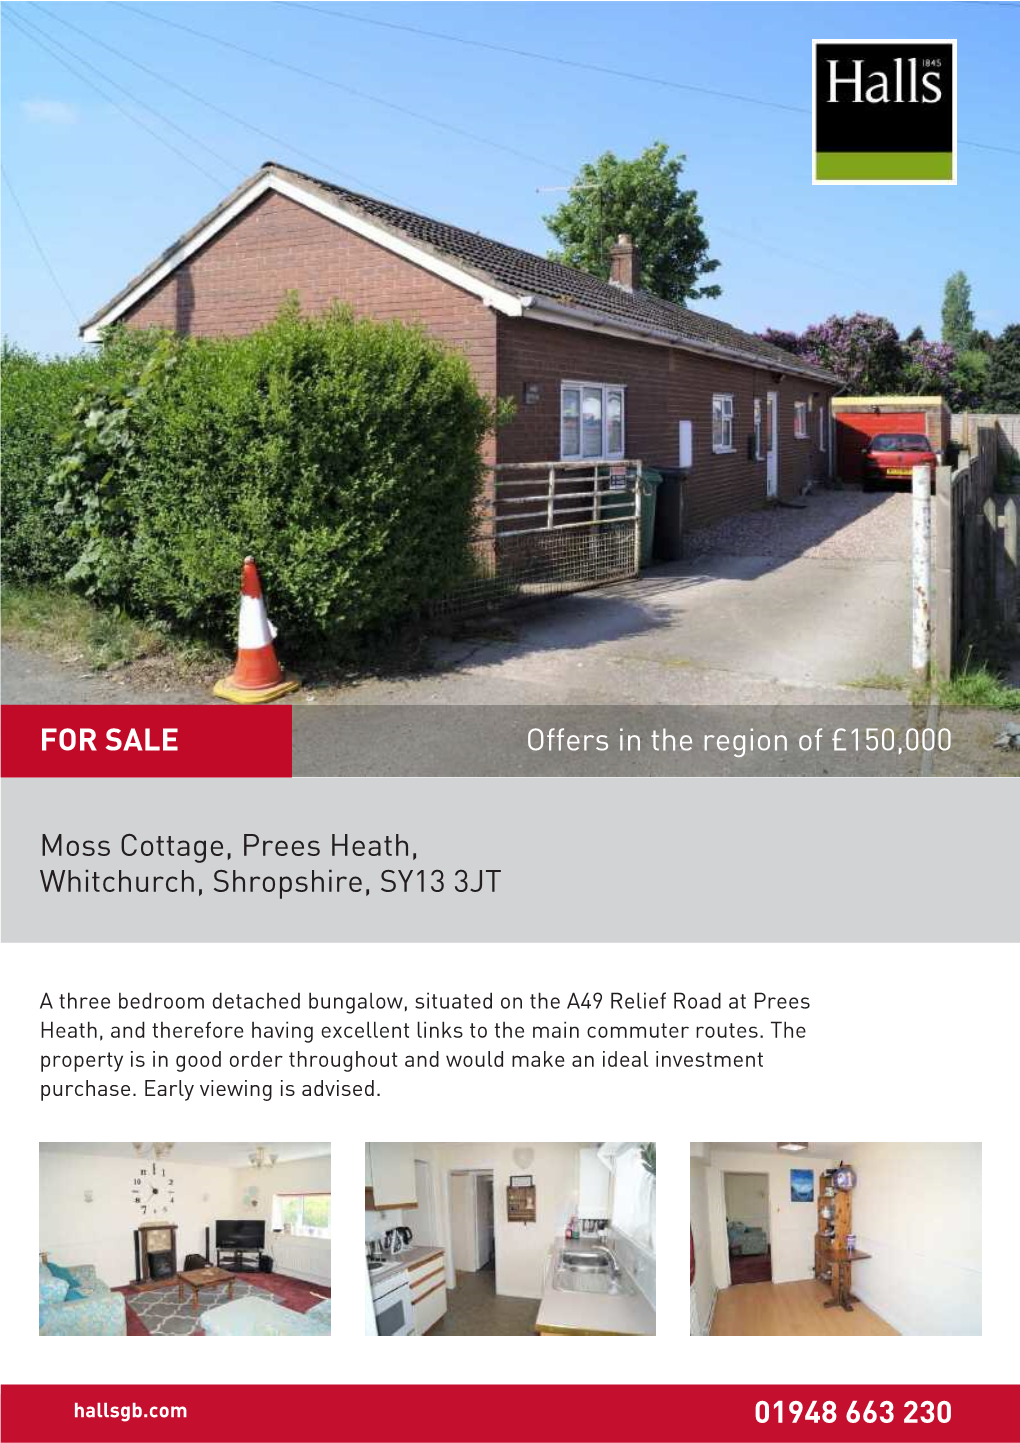 Moss Cottage, Prees Heath, Whitchurch, Shropshire, SY13 3JT